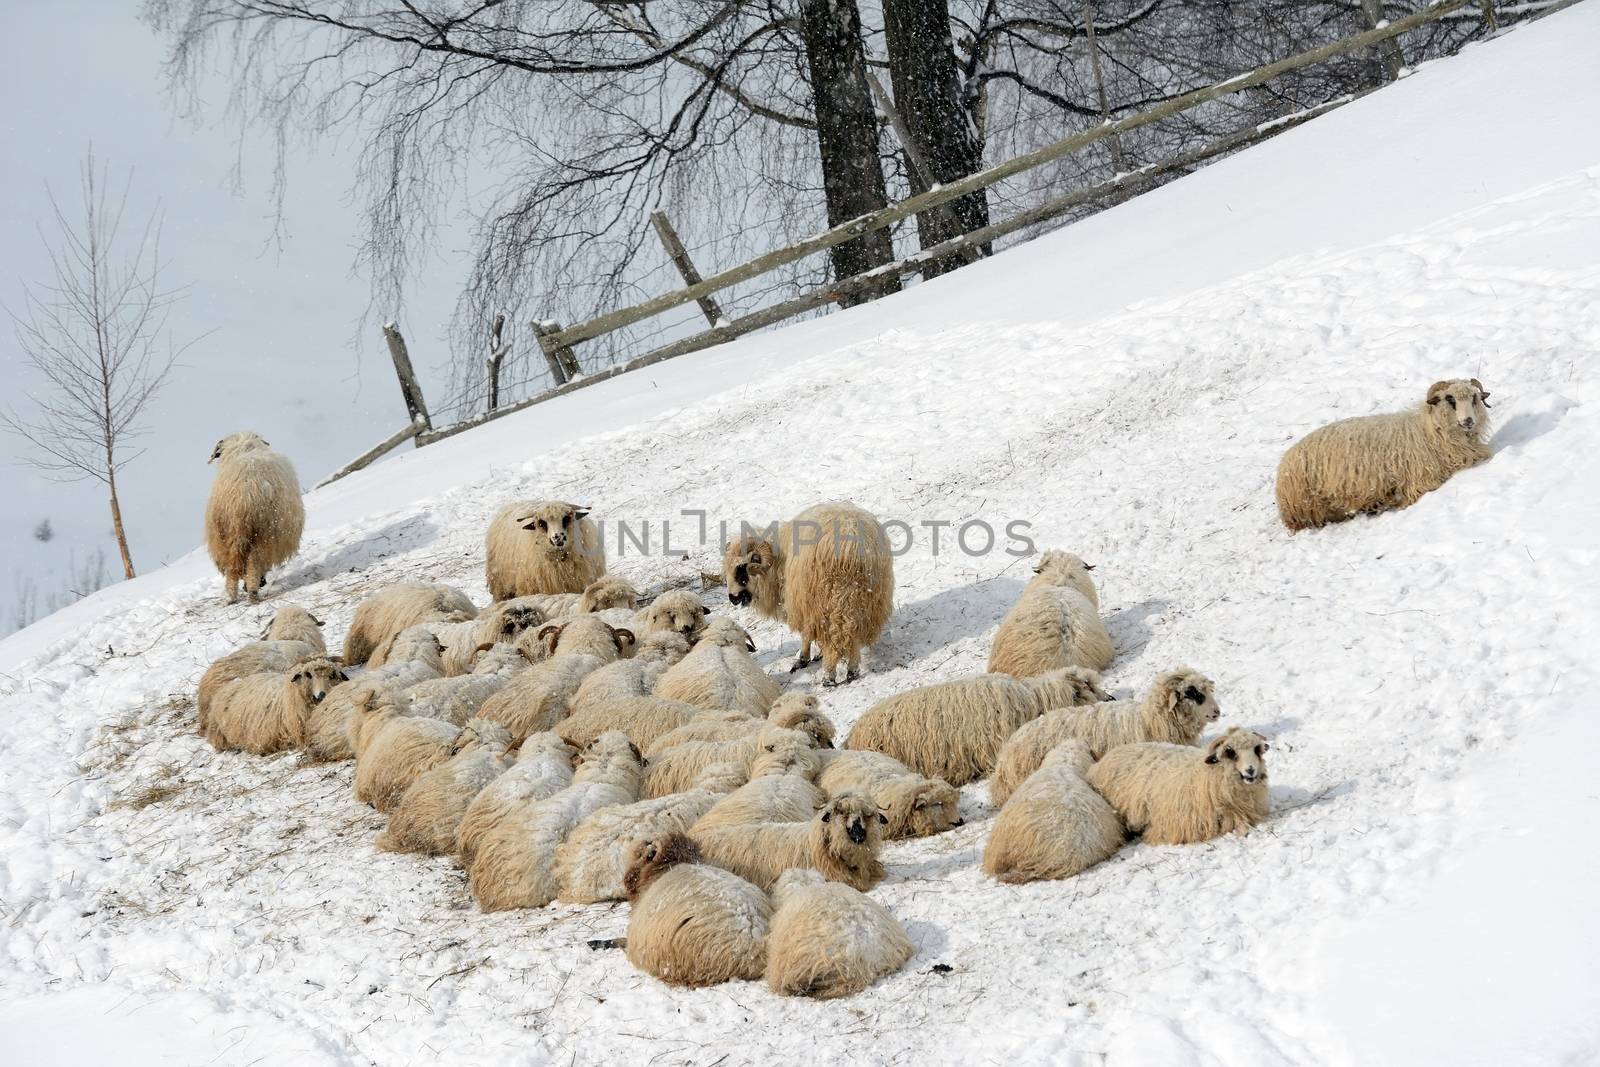 Herd of sheep standing on snow on farmland by comet